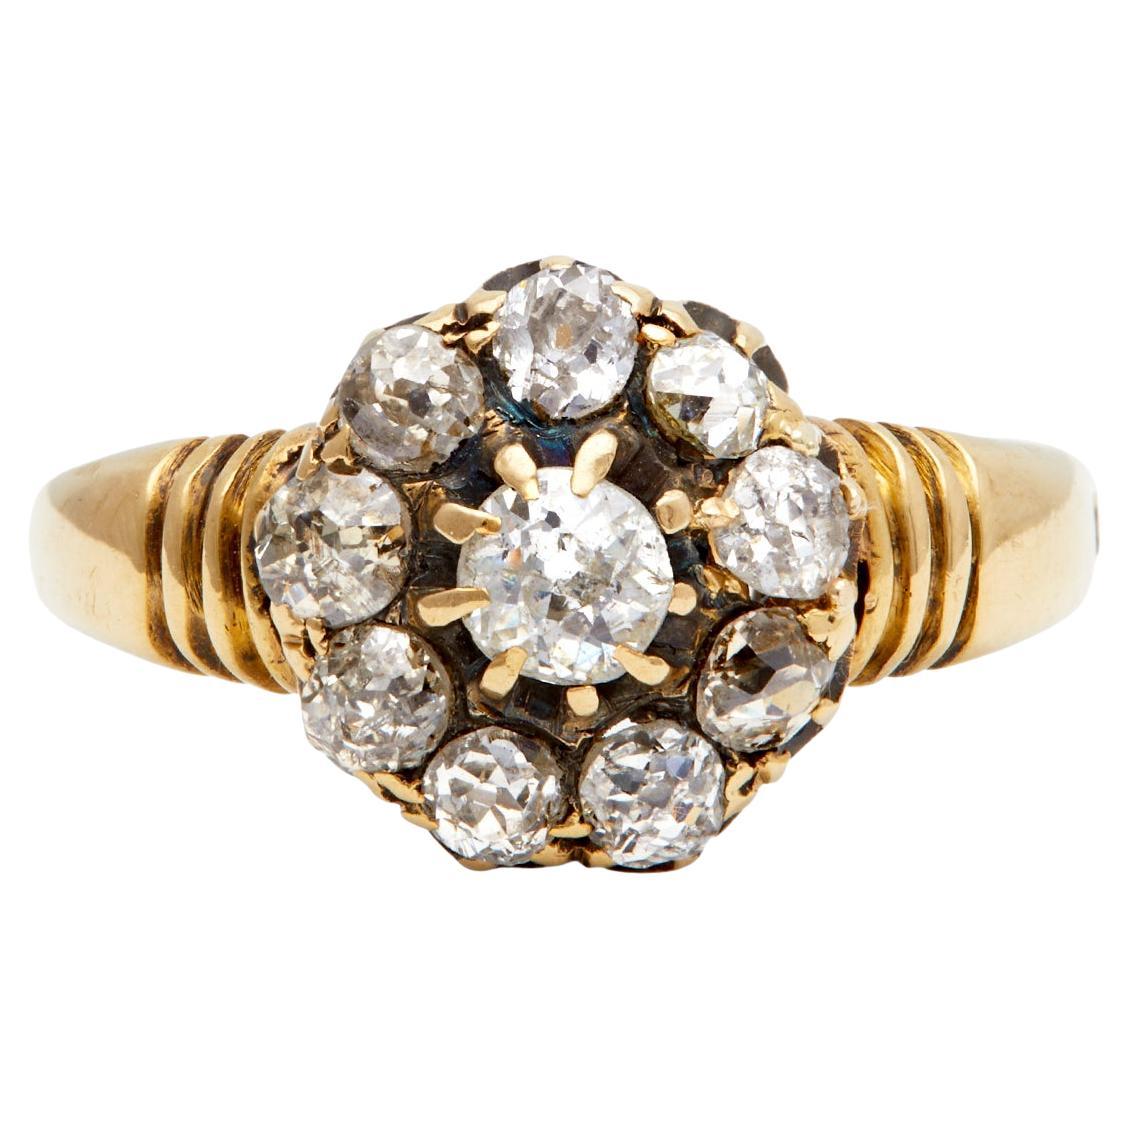 Late Victorian Old Cut Diamond 18k Yellow Gold Cluster Ring